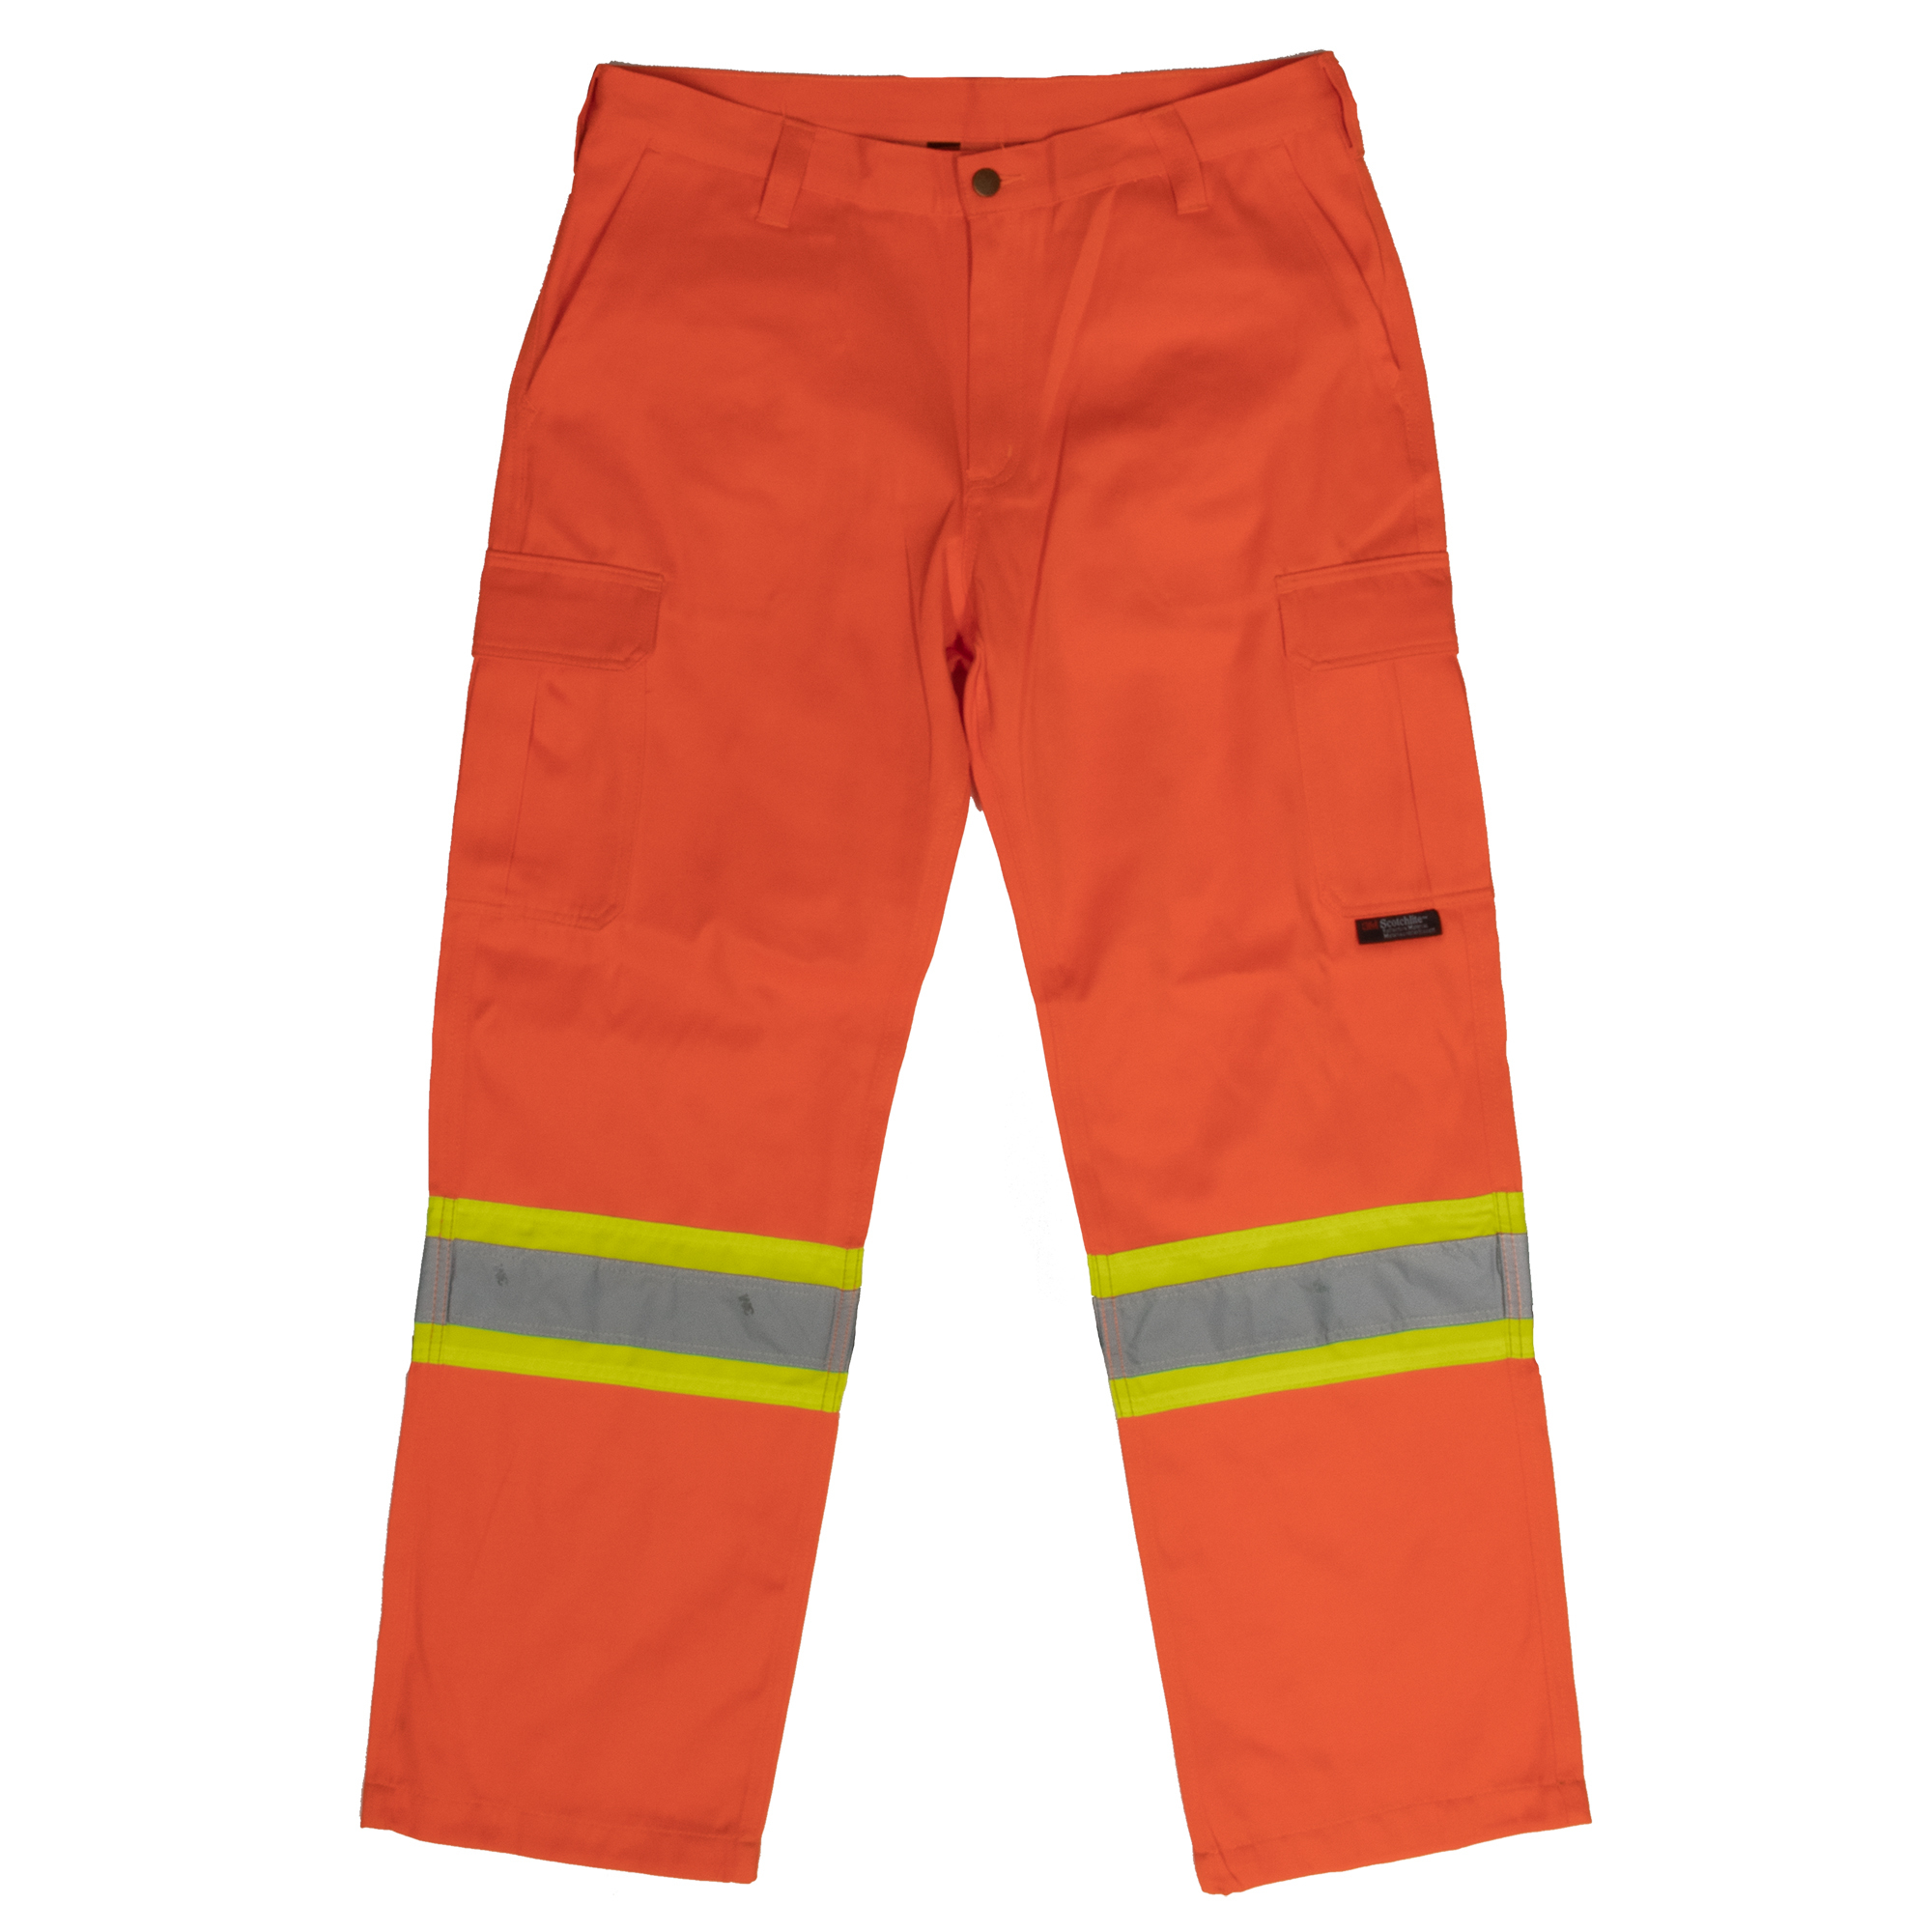 Tough Duck, Safety Cargo Work Pant, Waist 40 in, Inseam 34 in, Color Fluorescent Orange, Model SP013